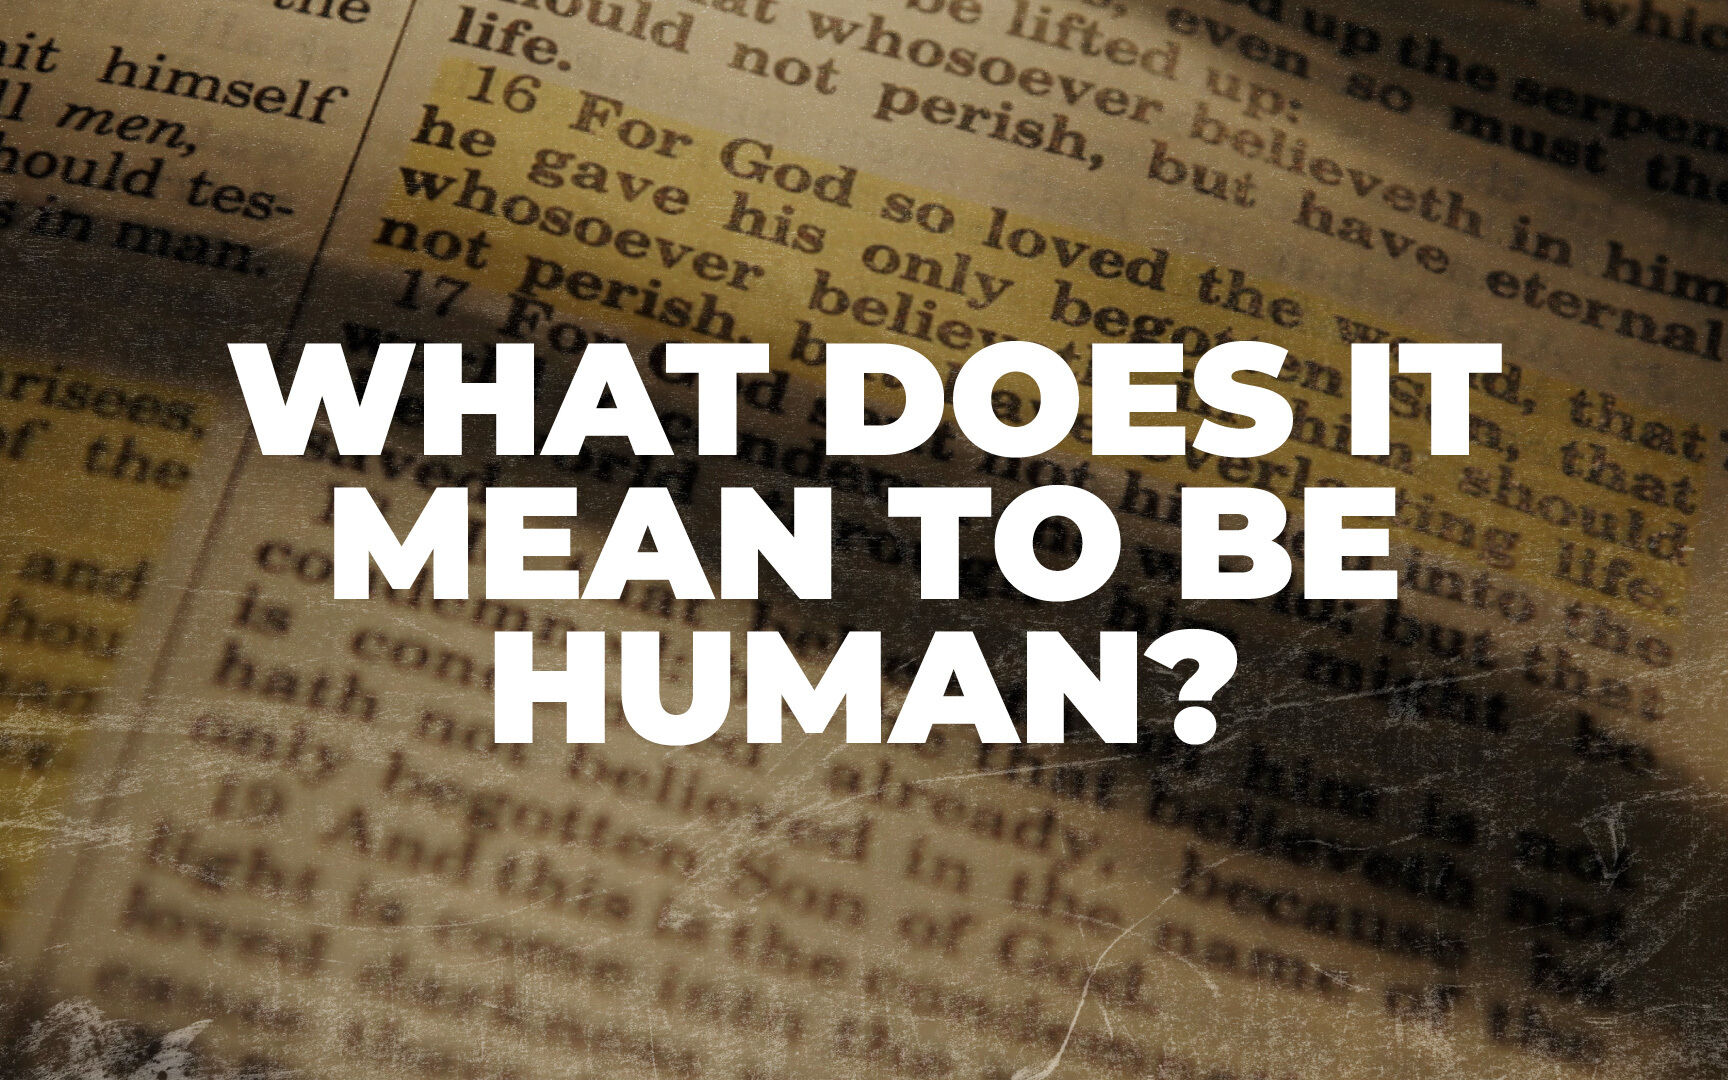 WHAT DOES IT MEAN TO BE HUMAN